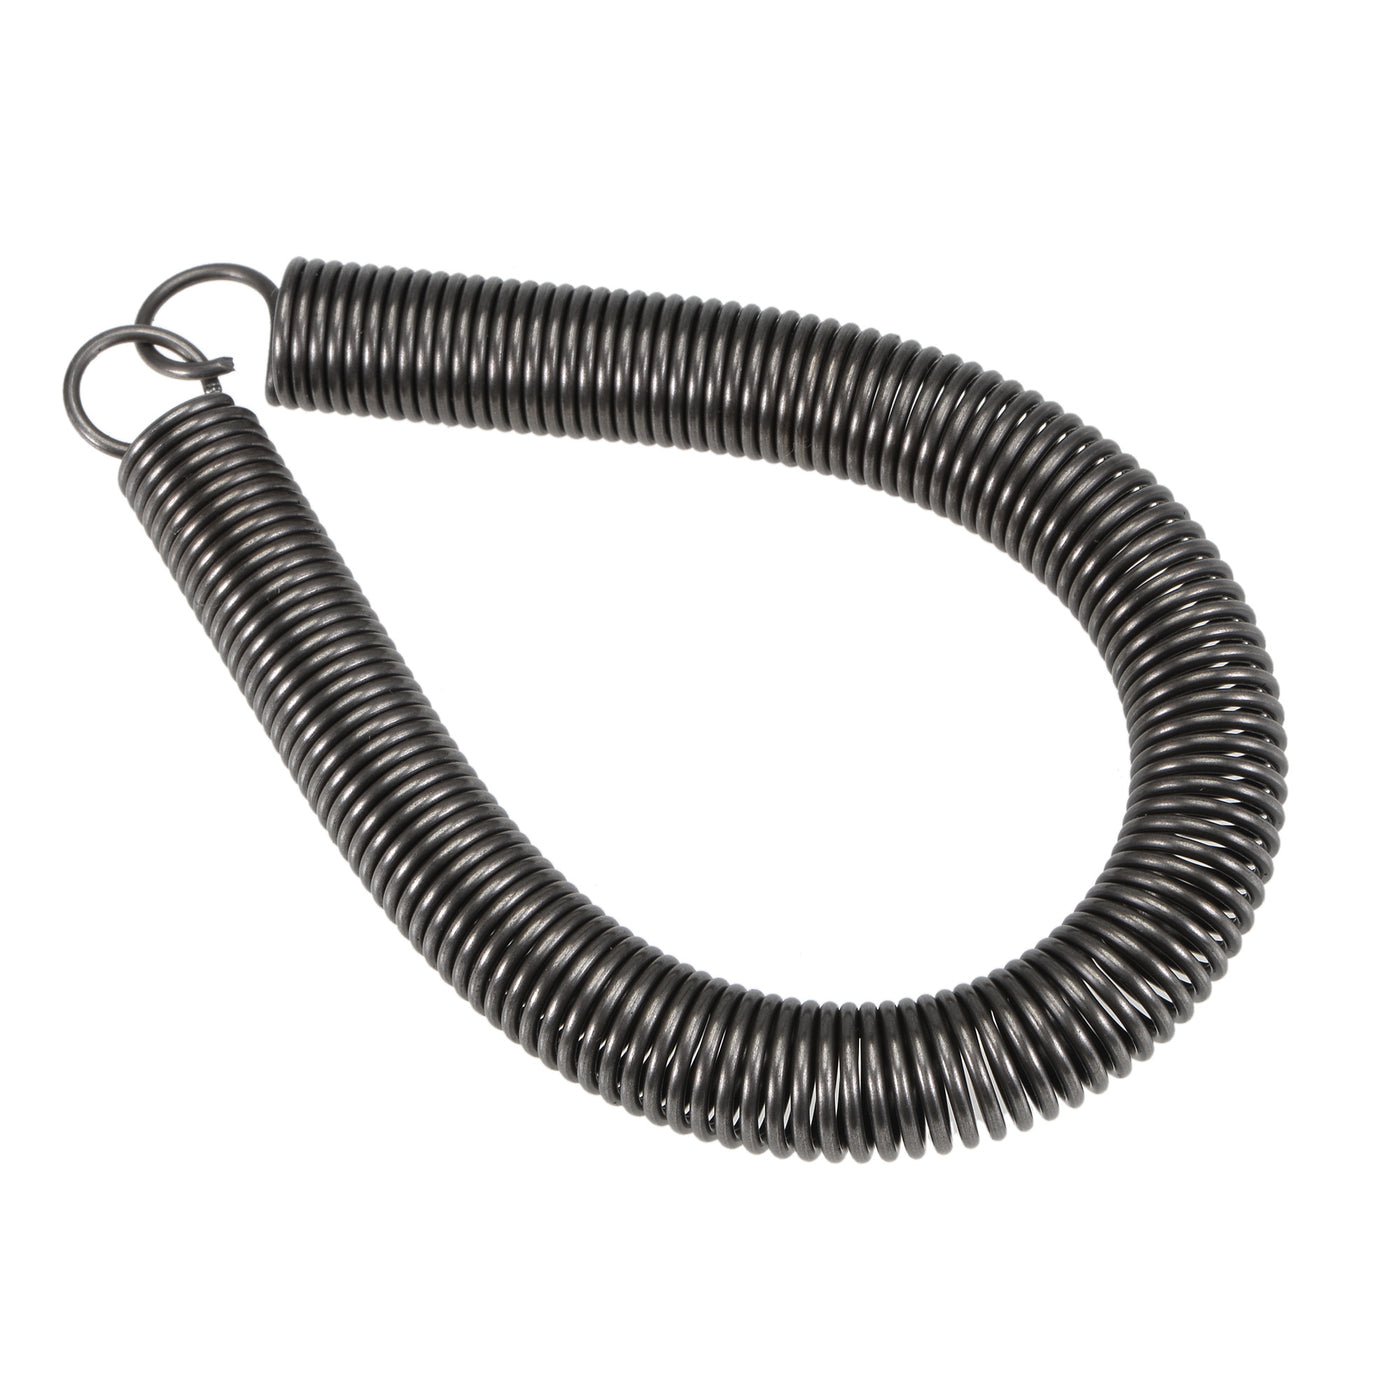 Uxcell Uxcell 1.2mmx10mmx150mm Extended Compression Spring ,6.6Lbs Load Capacity,Grey 2pcs